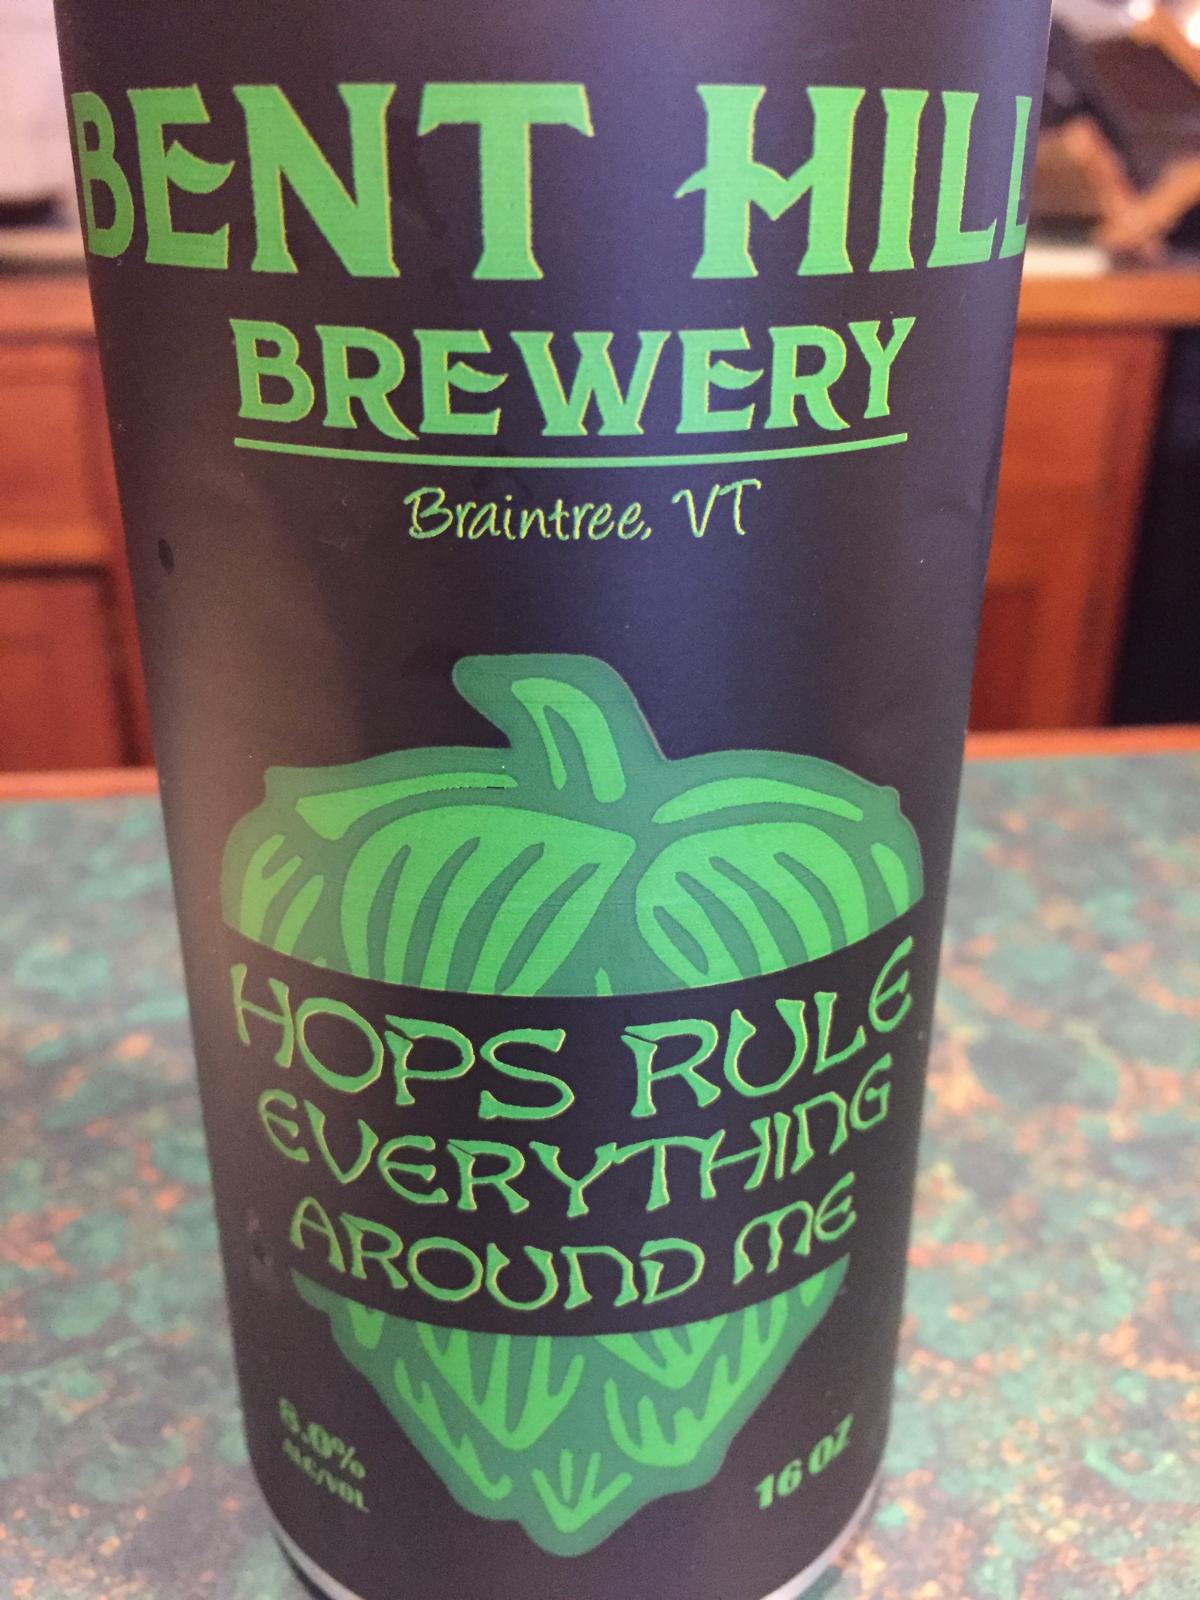 Hops Rule Everything Around Me